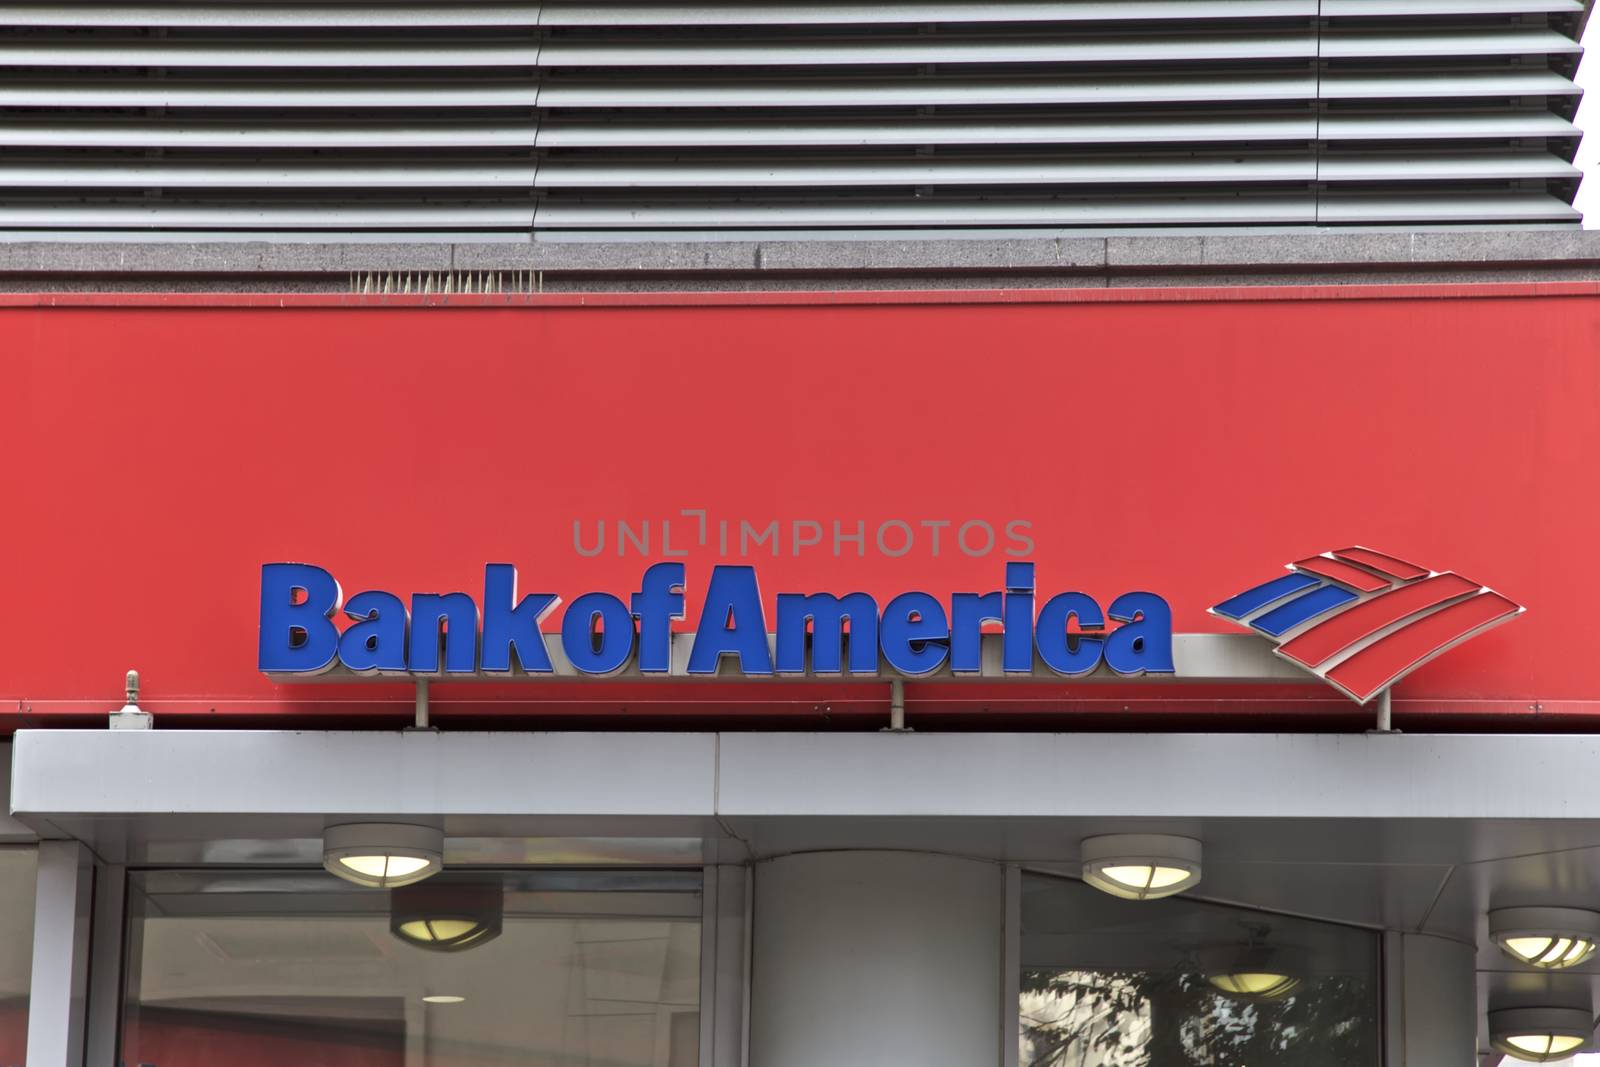 Bank of America in Manhattan, New York, United States of America

NEW YORK - JUNE 06:Bank of America branch in New York, United States America. Photo taken on: August 17th, 2015.